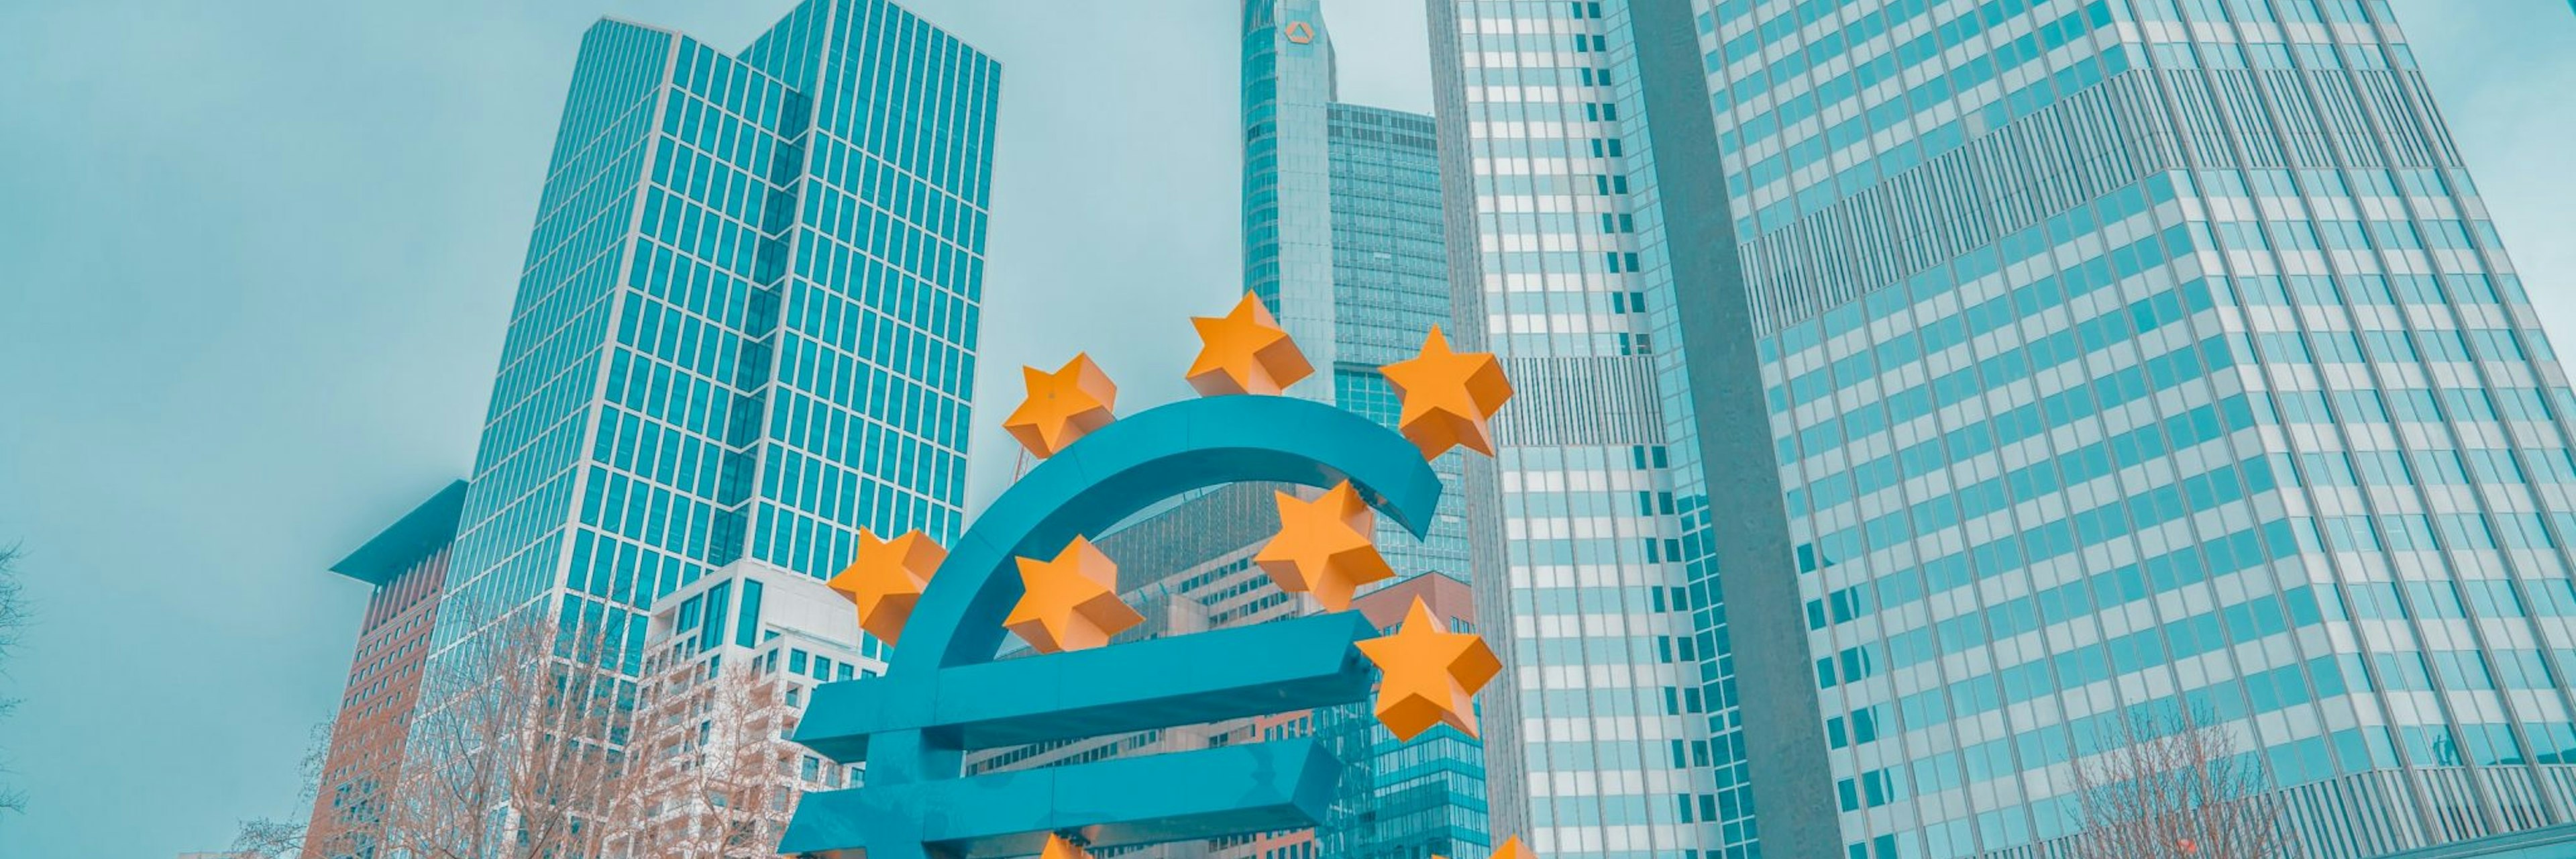 A picture of a euro sign in front of skyscrapers.